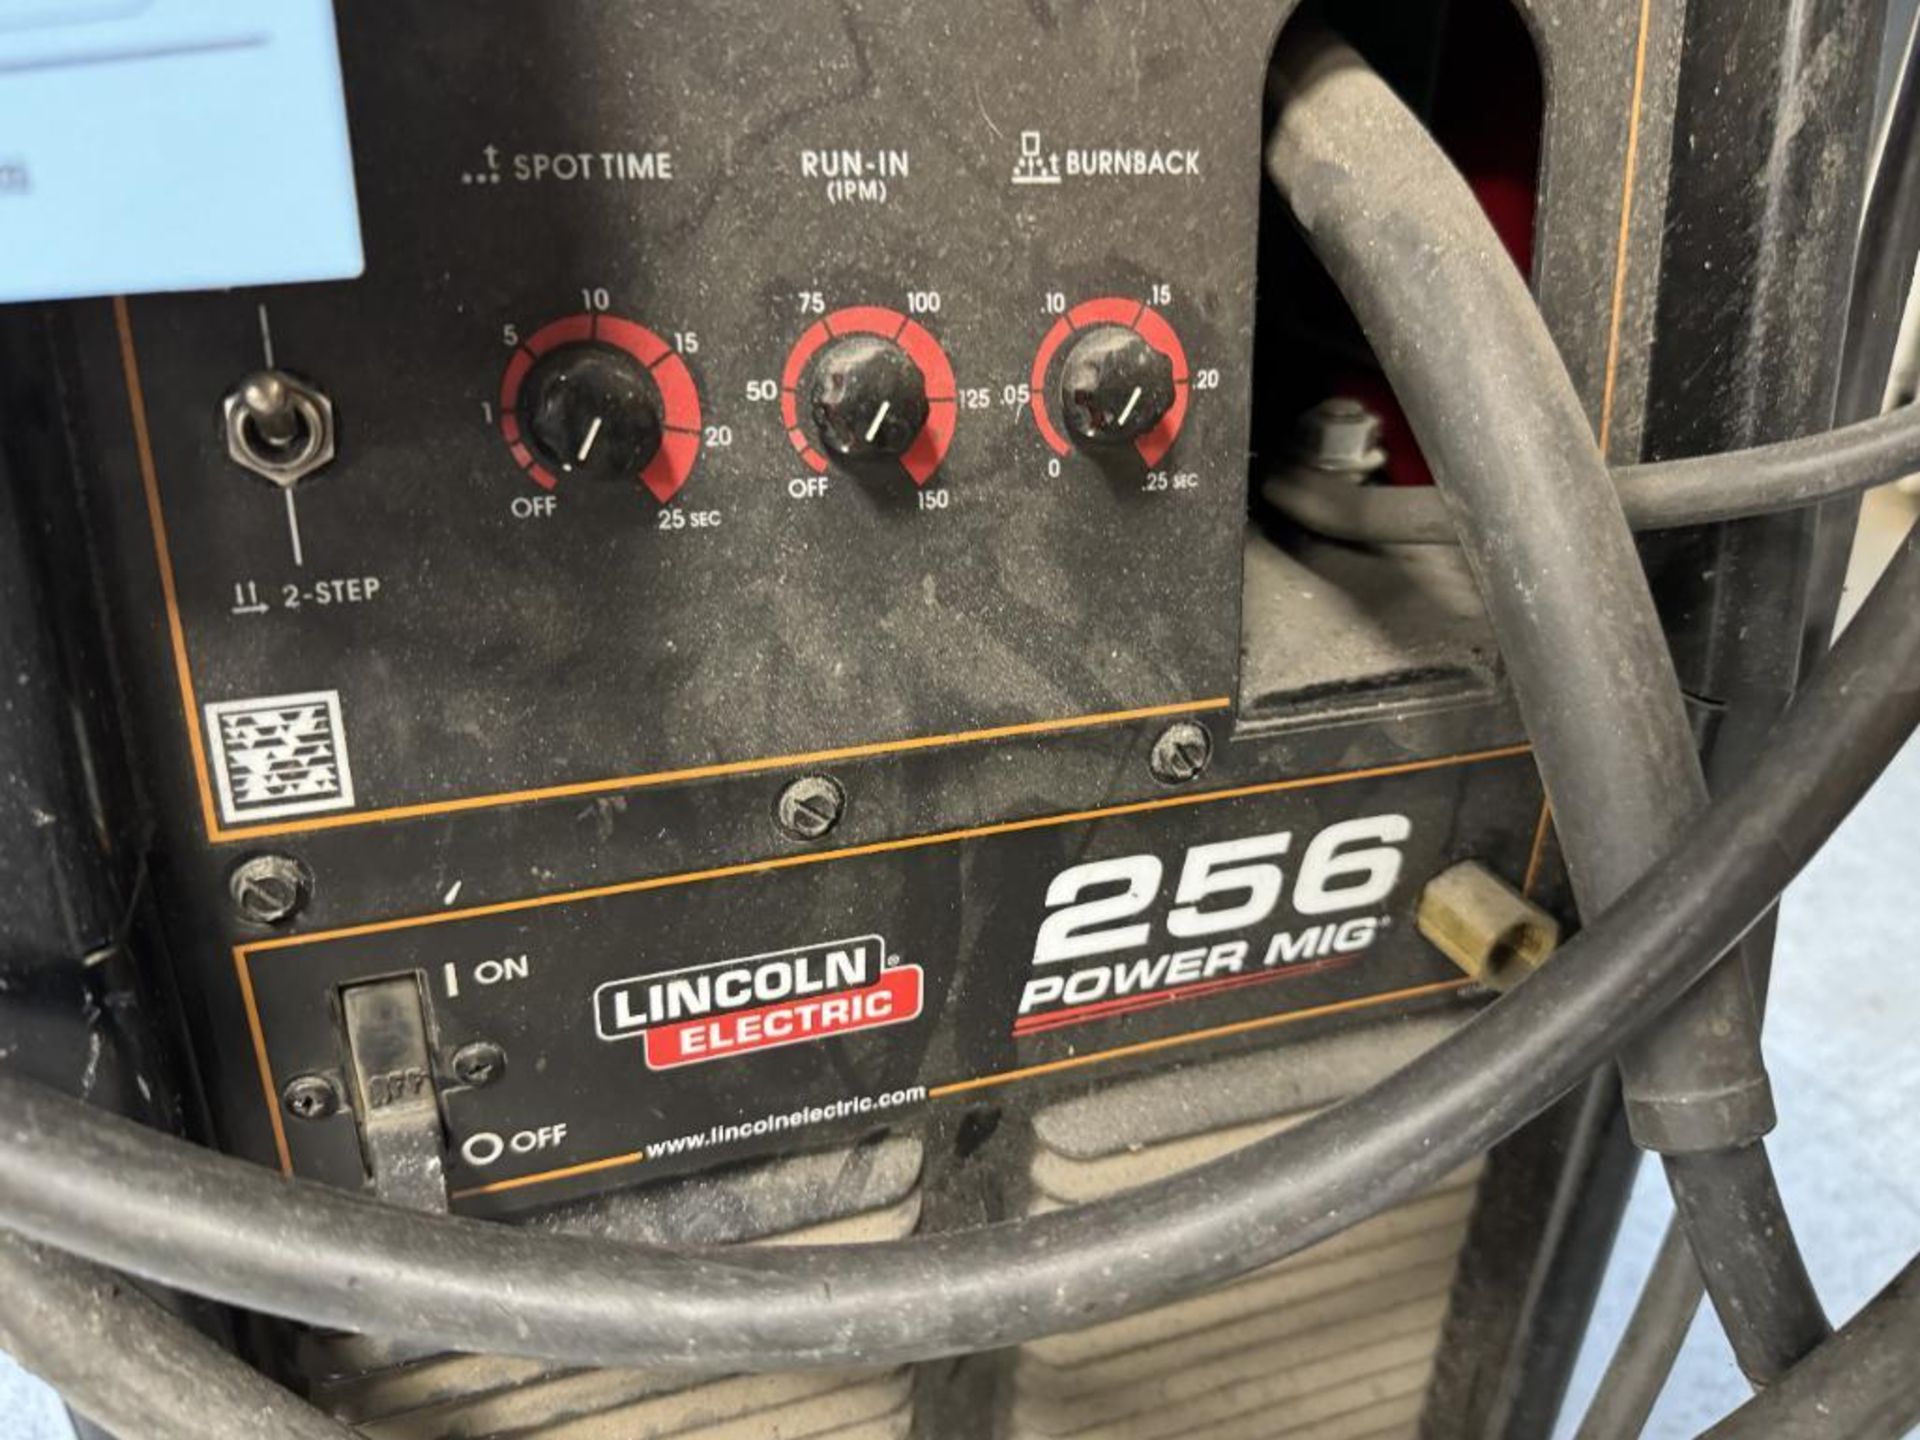 Lincoln Electric Power Mig 256 Welder. **TANK NOT INCLUDED** - Image 5 of 6